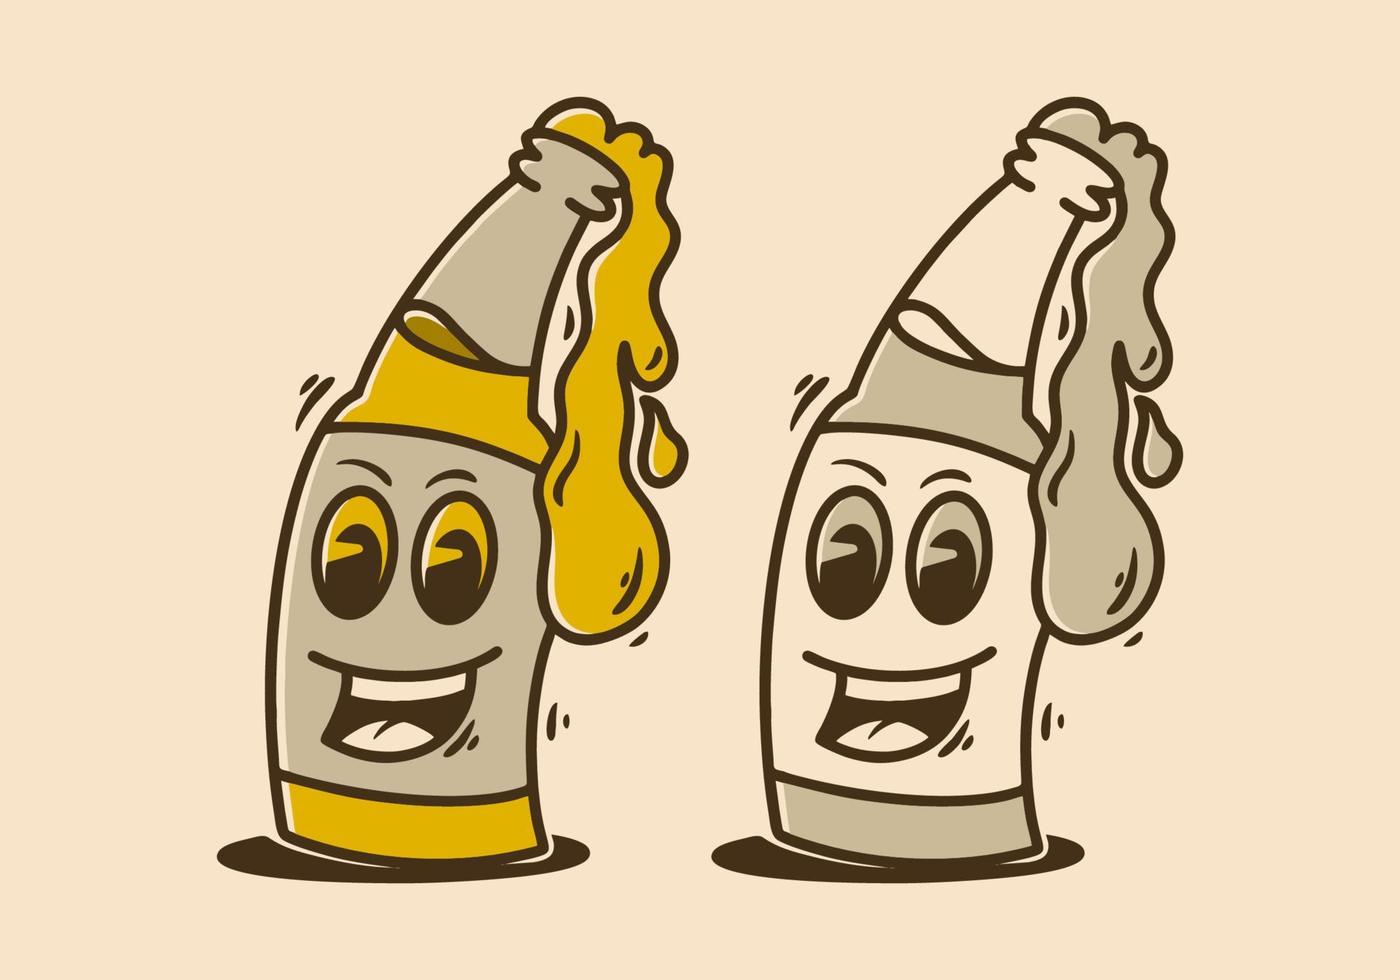 The bottle beer character with happy face vector